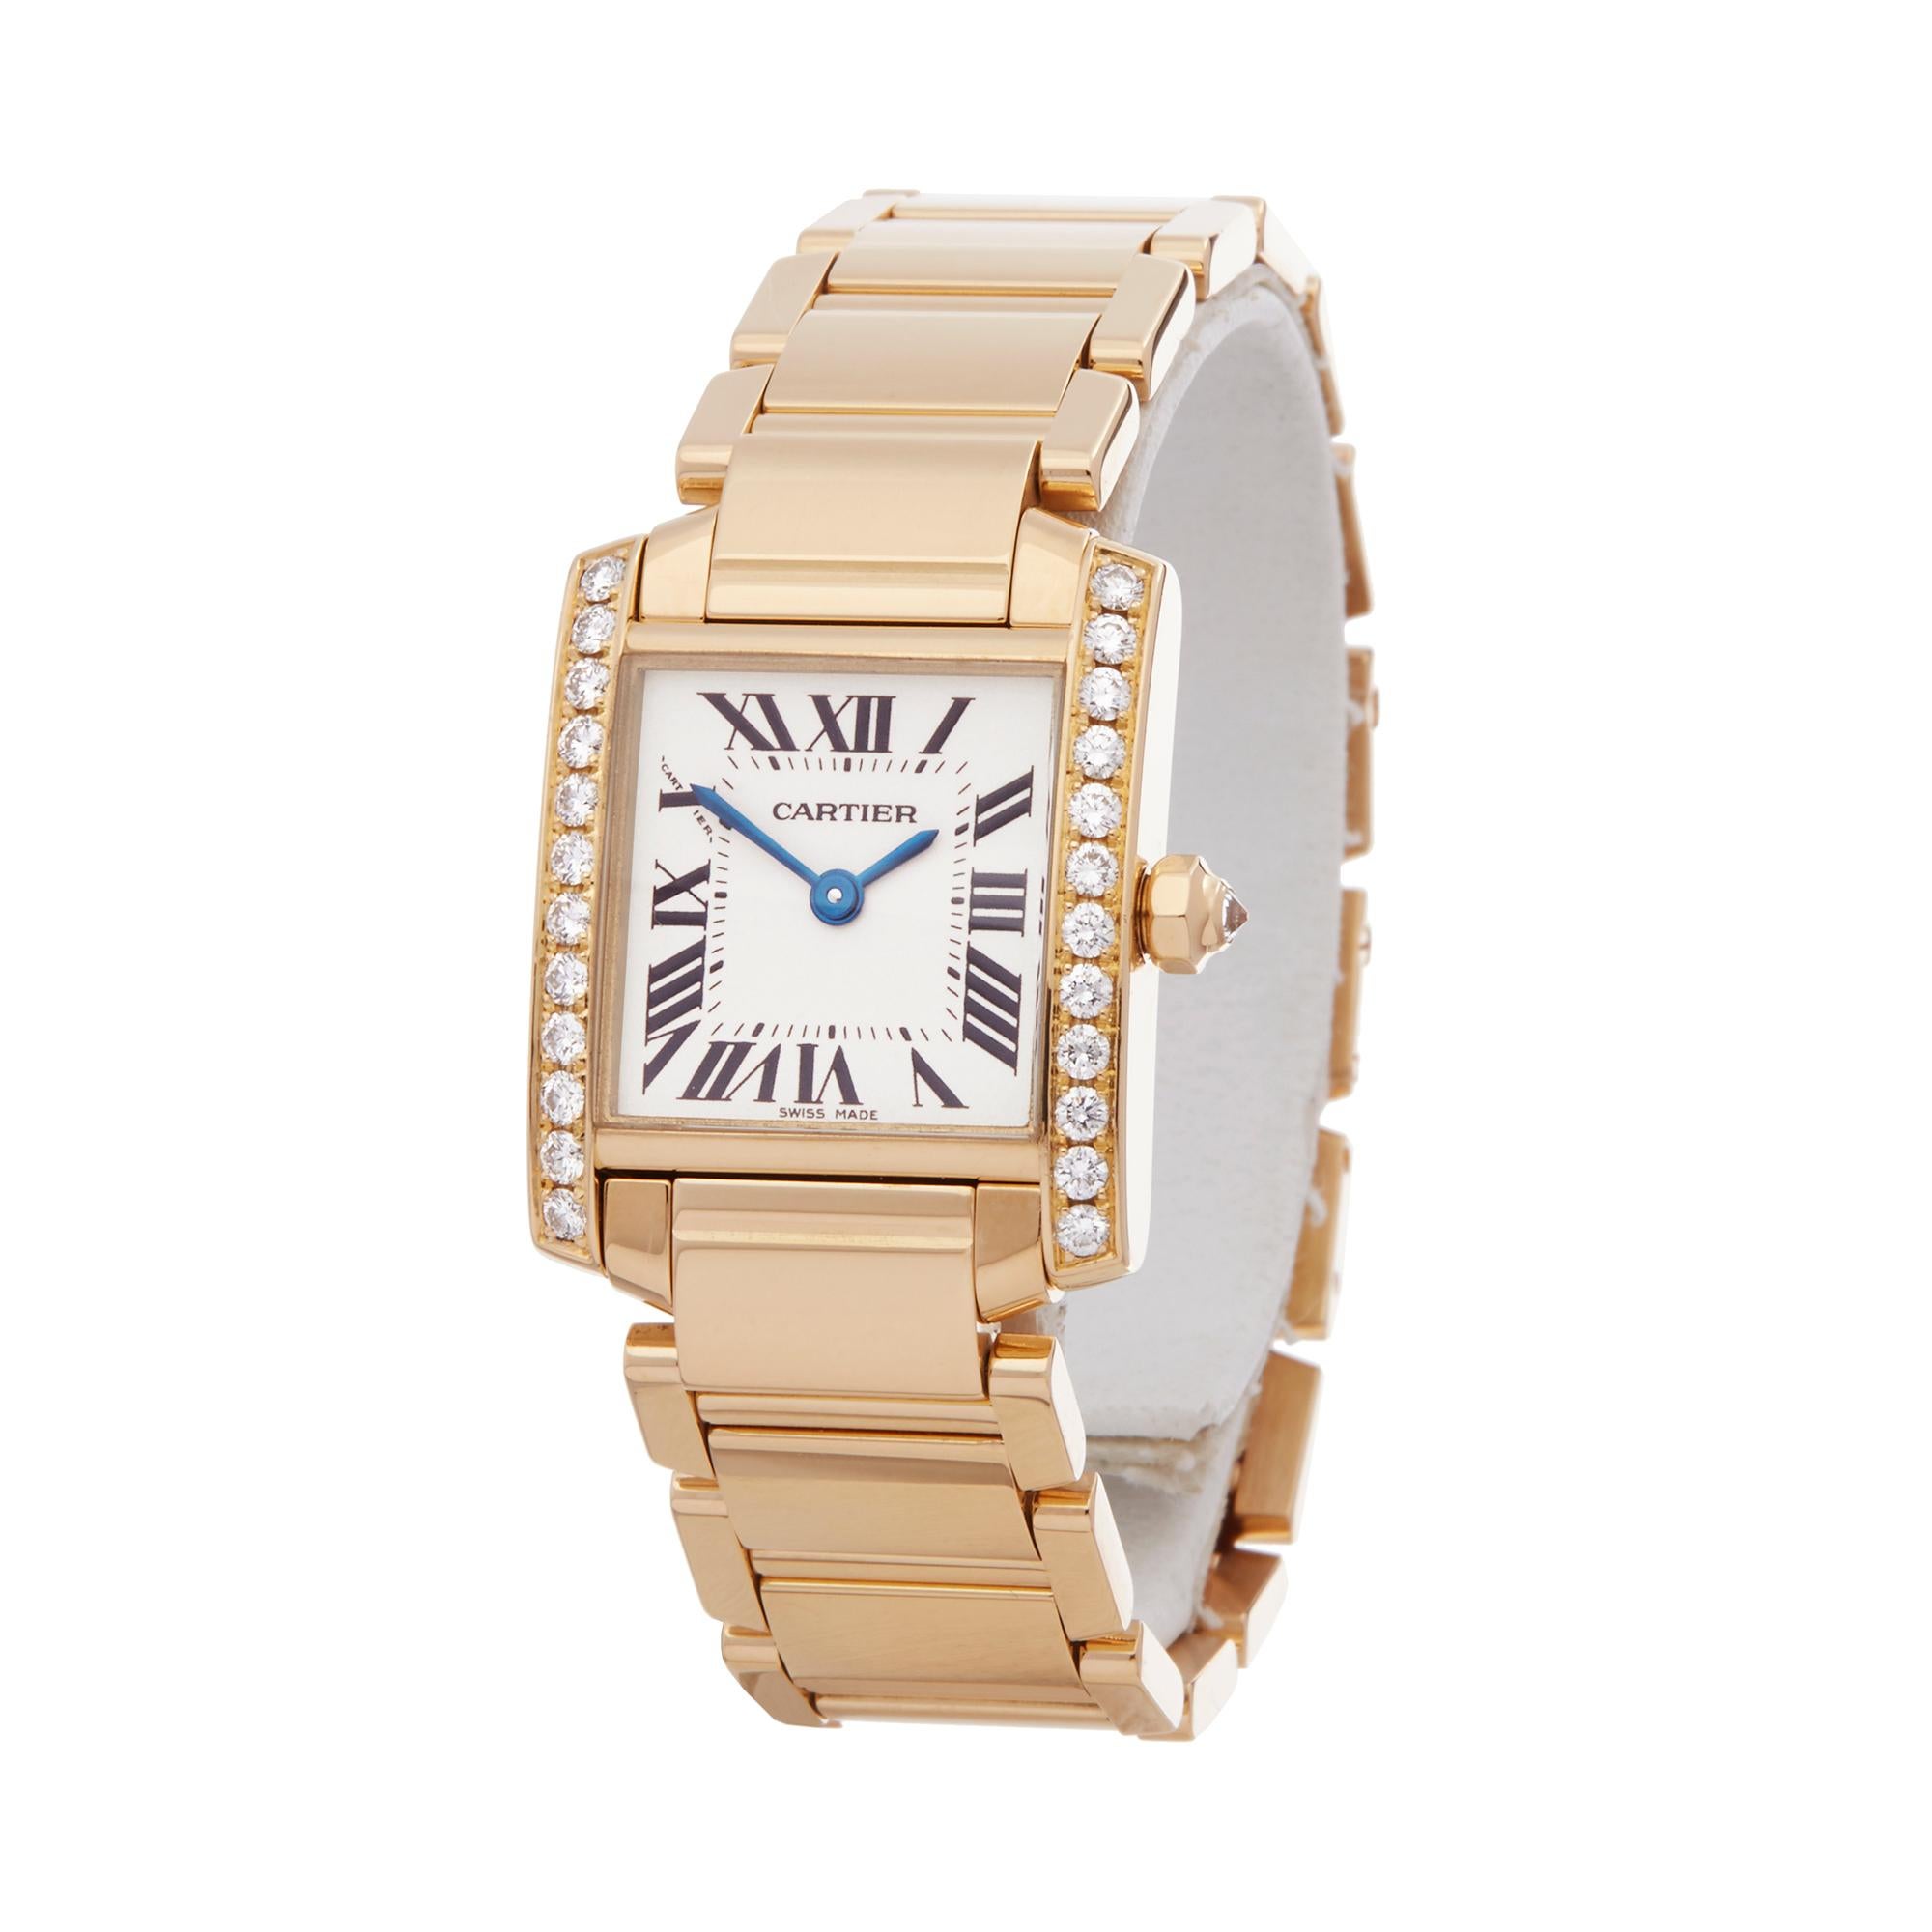 Ref: W6170
Manufacturer: Cartier
Model: Tank
Model Ref: 2385
Age: Circa 2000's
Gender: Ladies
Complete With: Box & Manuals
Dial: White Roman 
Glass: Sapphire Crystal
Movement: Quartz
Water Resistance: To Manufacturers Specifications
Case: Yellow